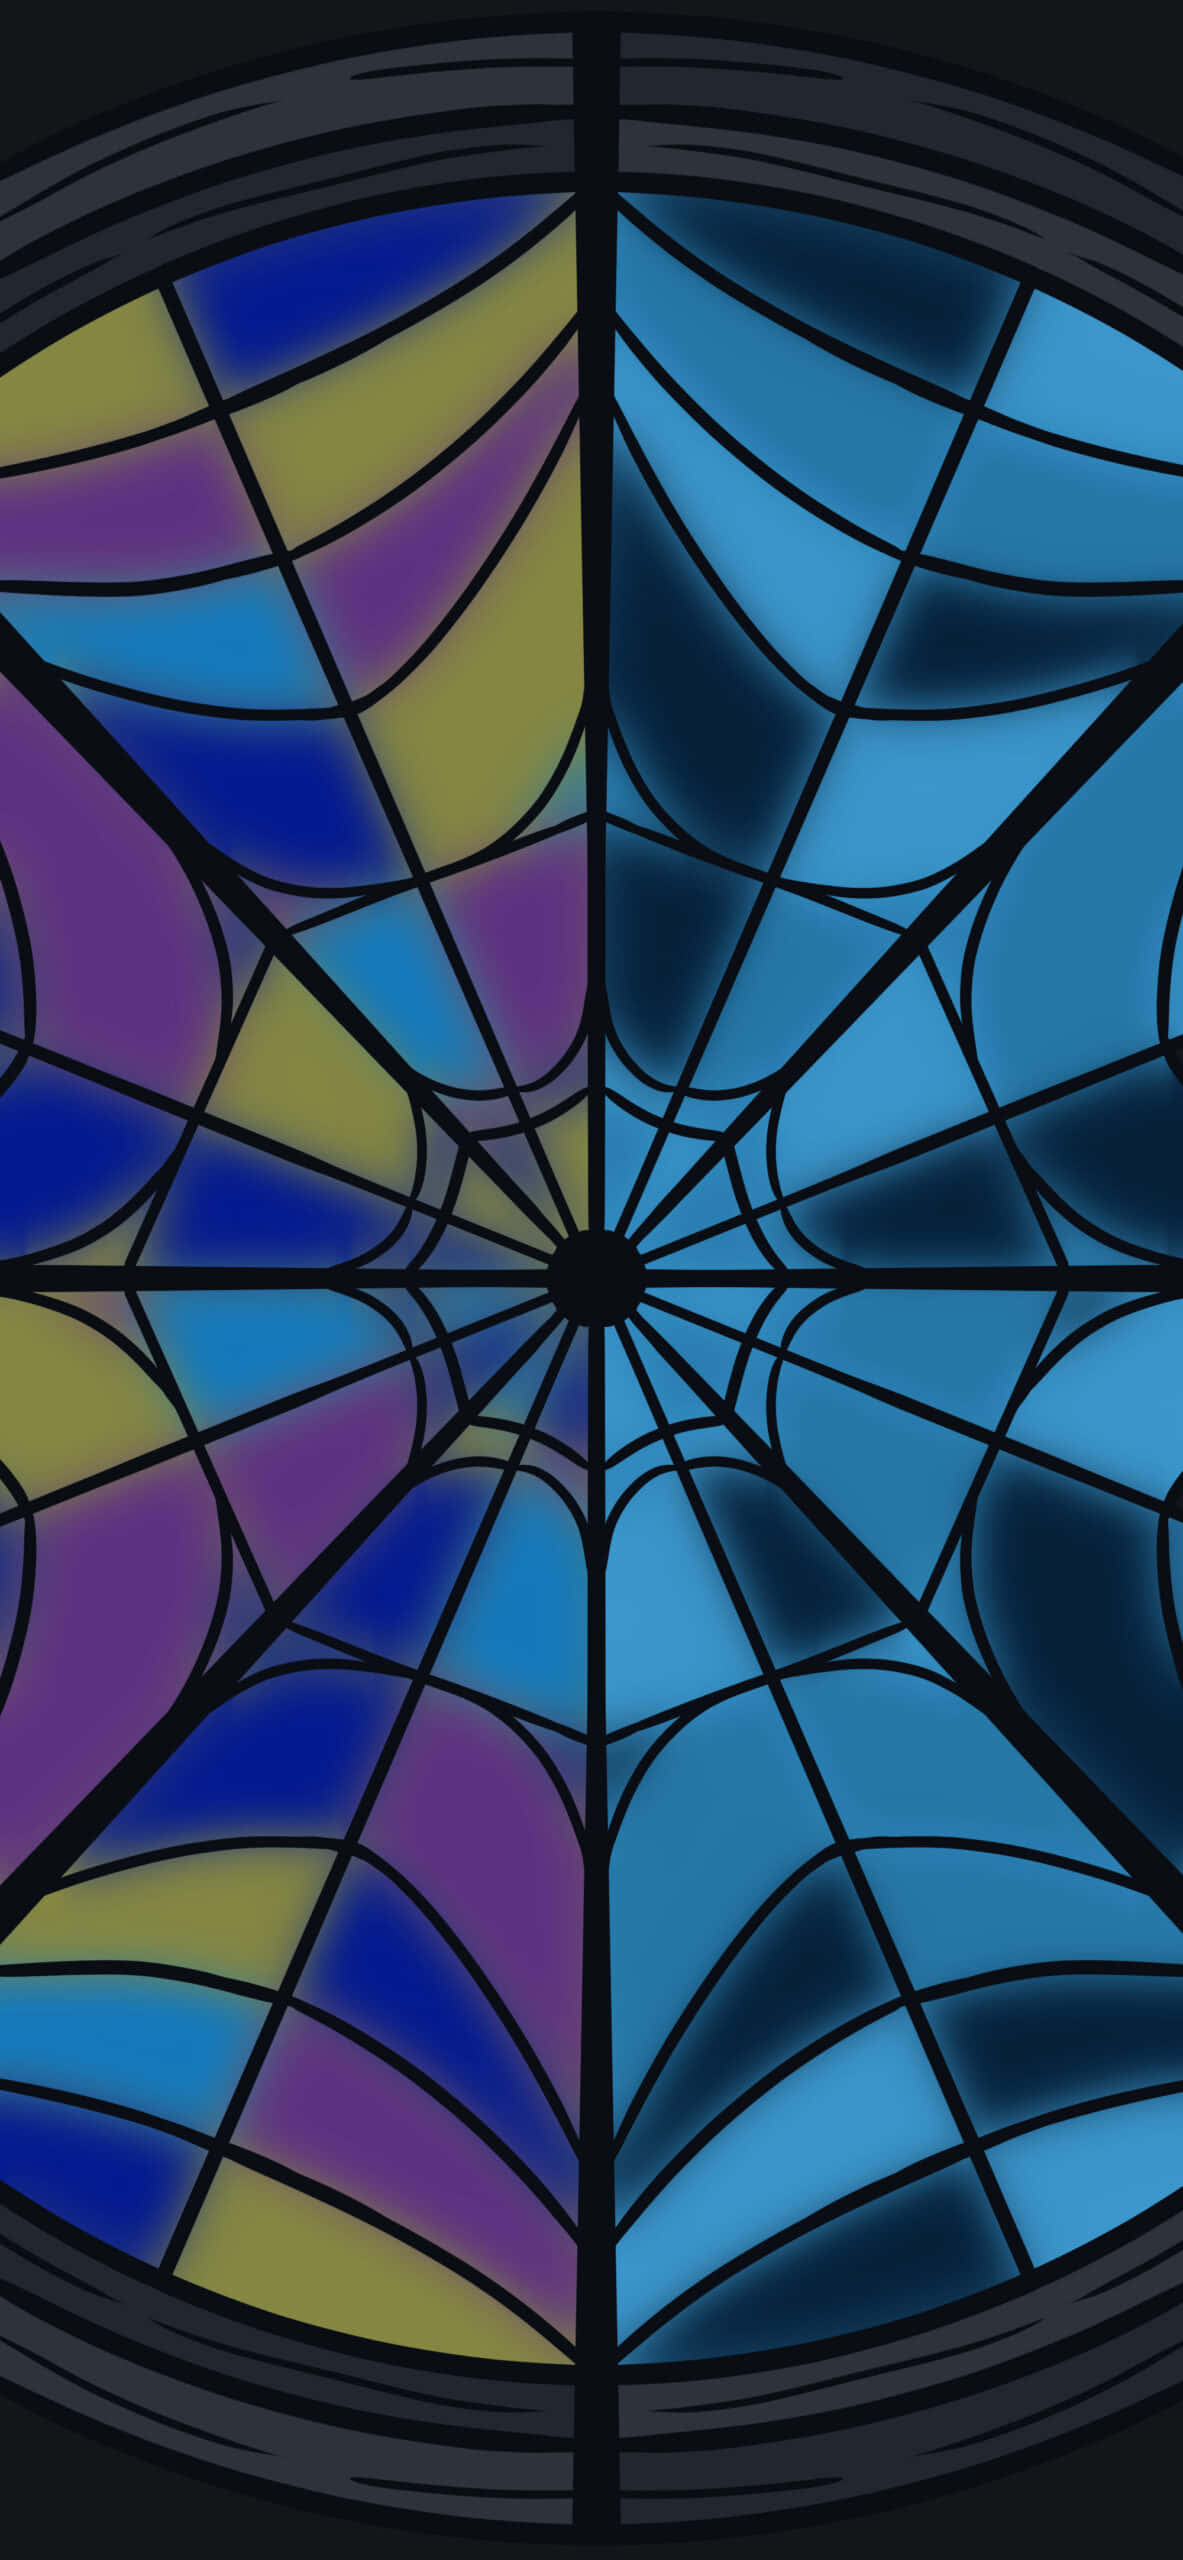 A Stained Glass Window With Blue And Purple Colors